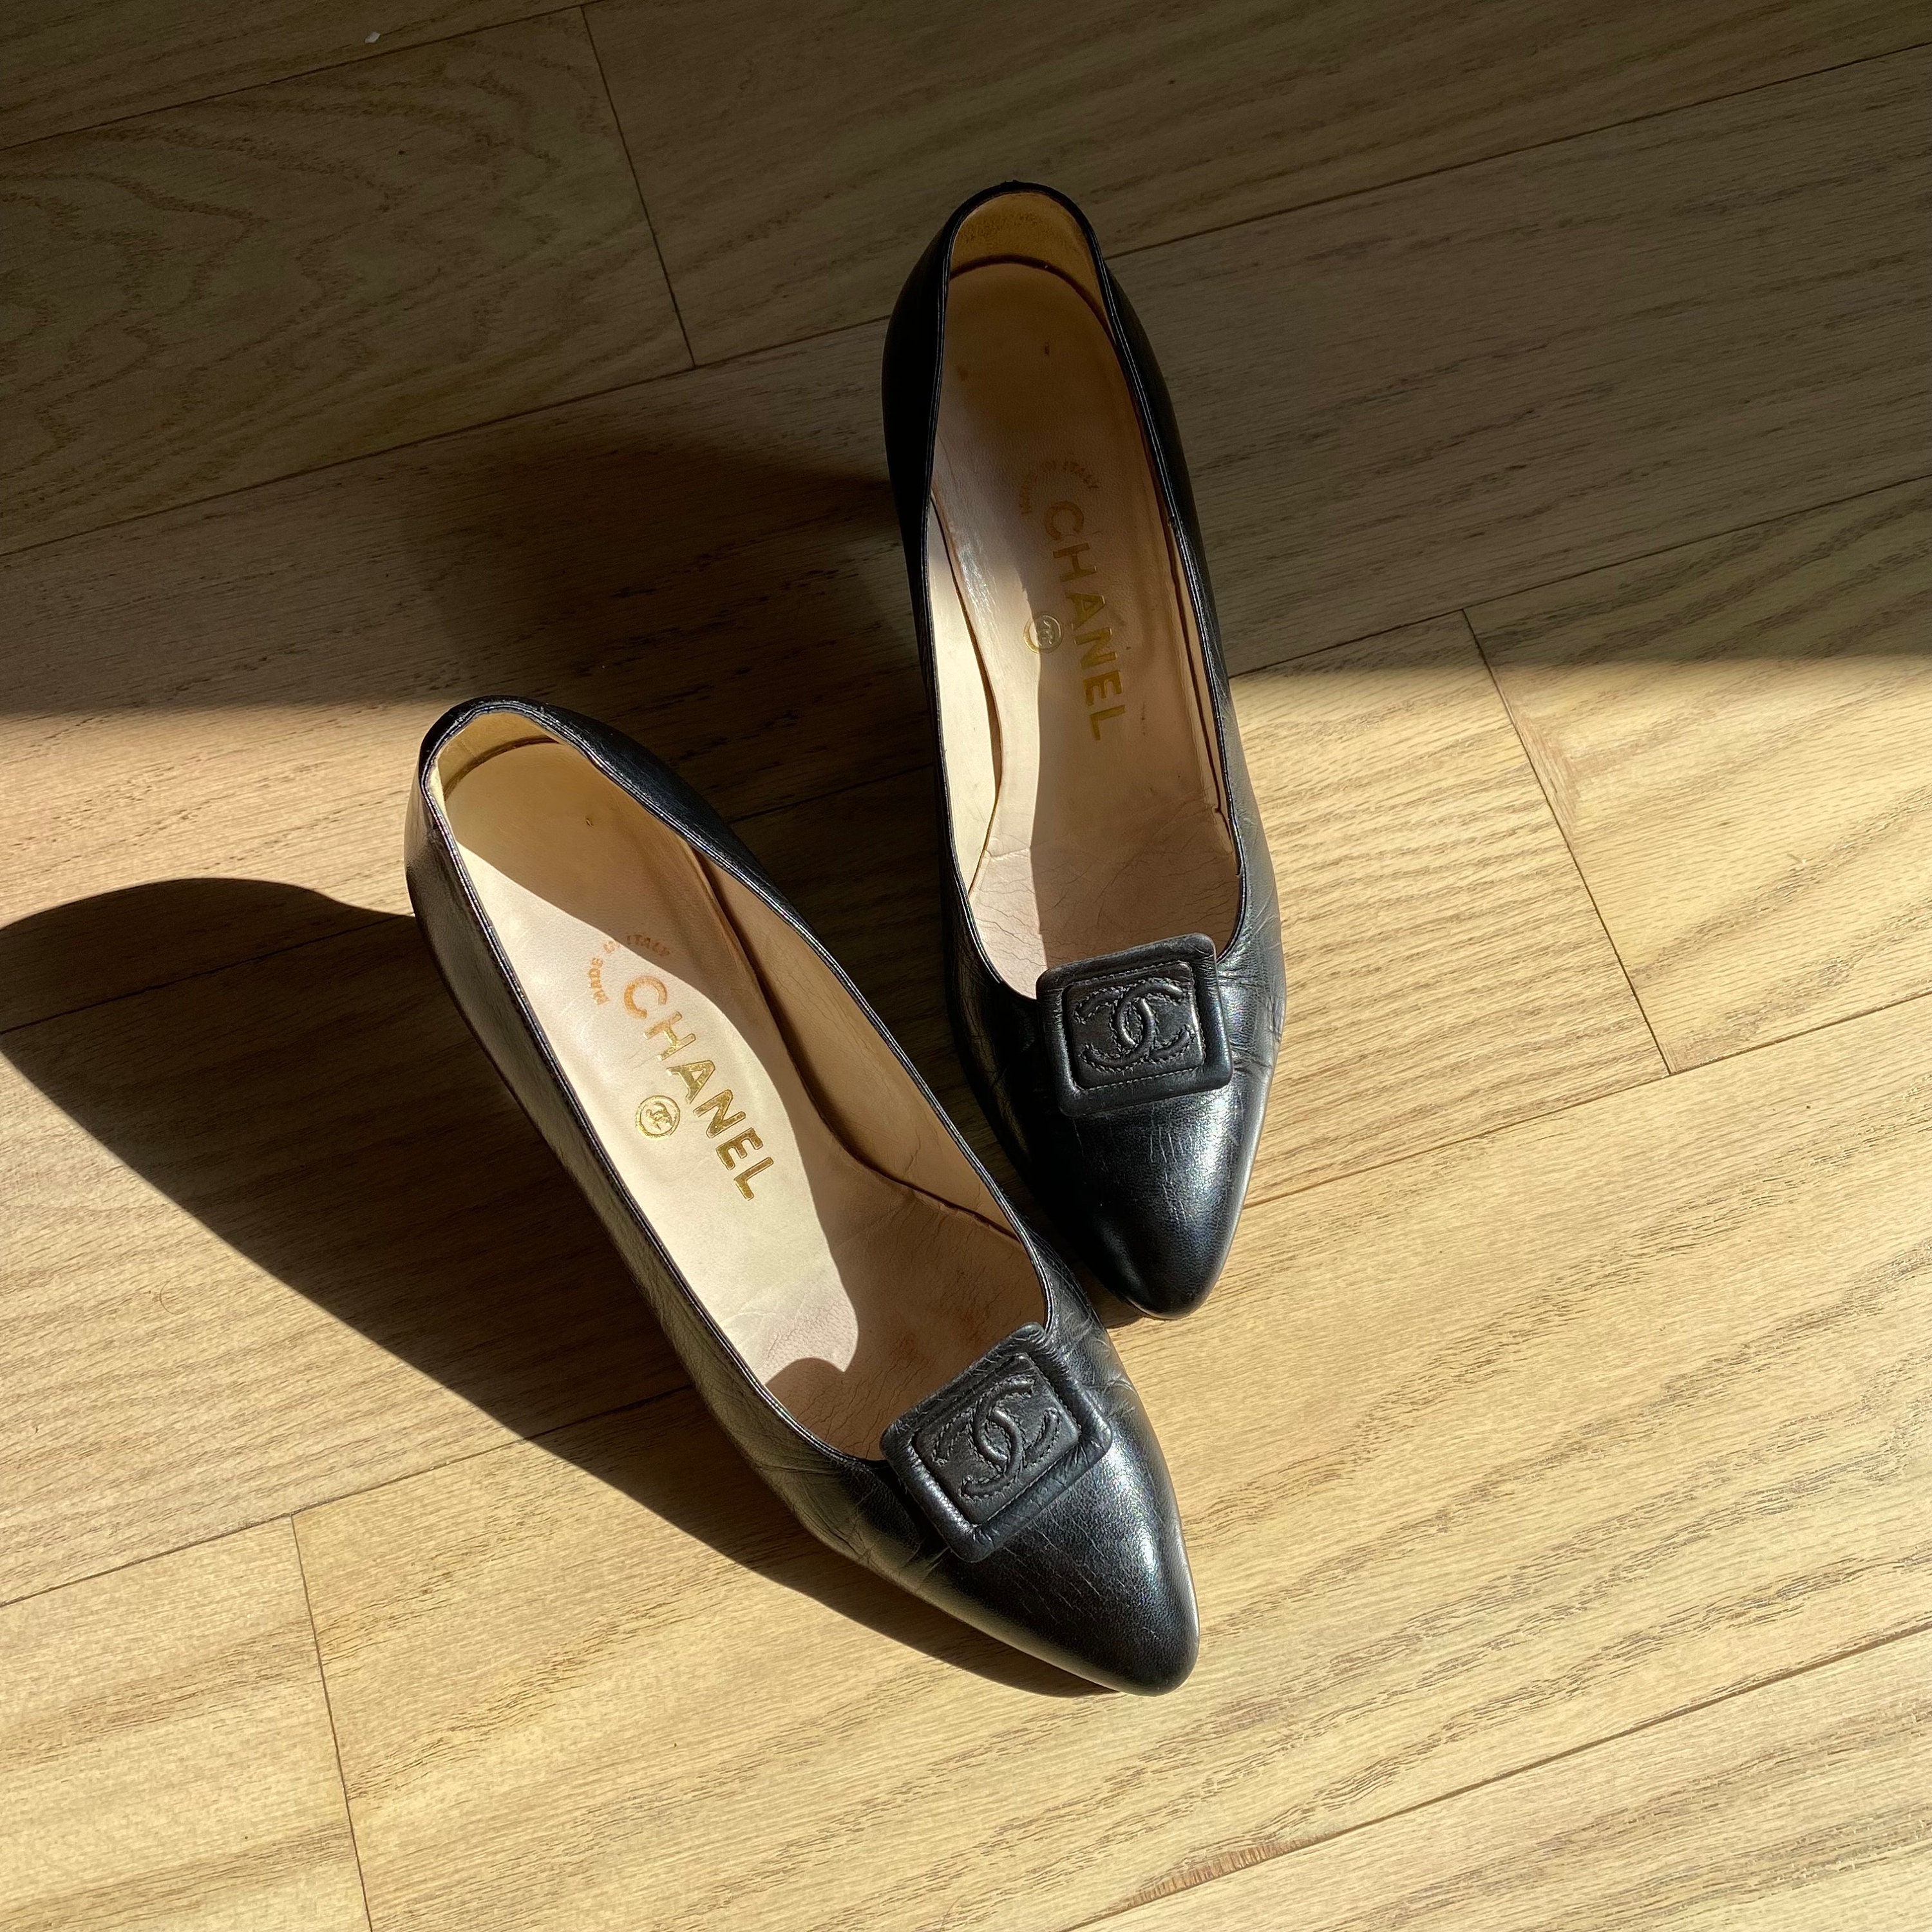 Chanel Black Patent Leather Loafers - For Sale on 1stDibs  chanel loafers,  chanel patent leather loafers, chanel patent loafers